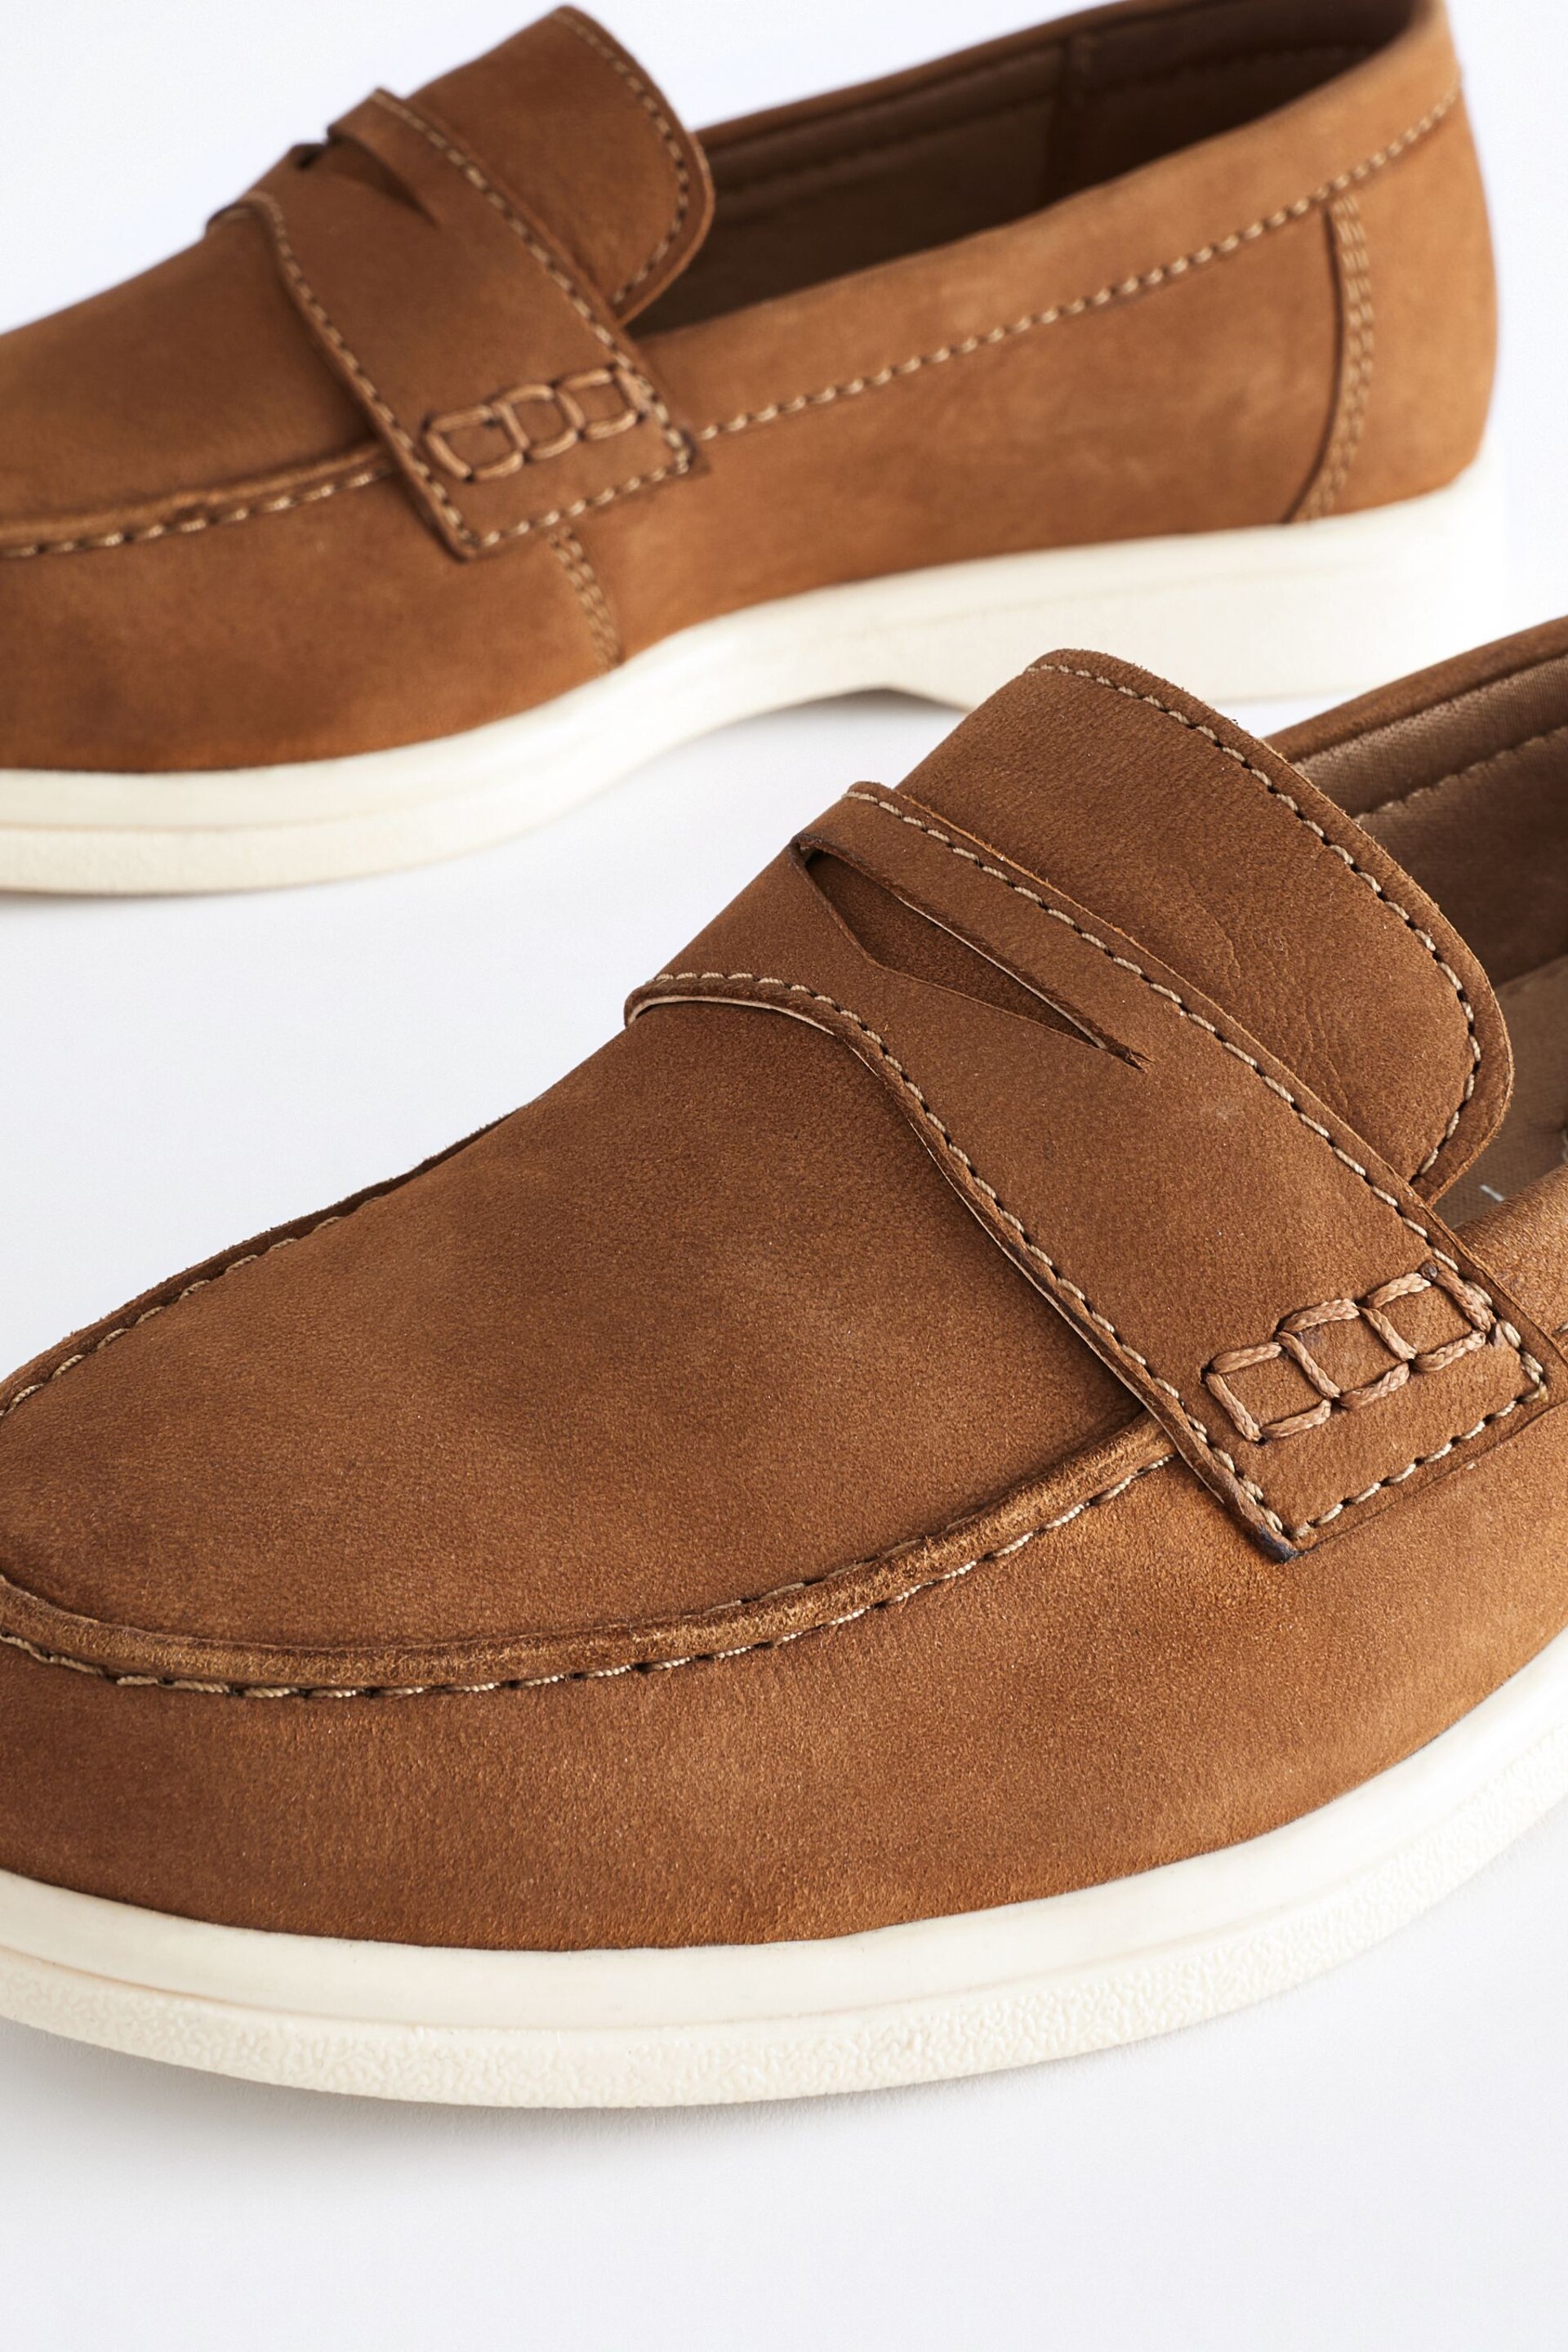 Tan Brown Contrast Sole Leather Penny Loafers - Image 5 of 6